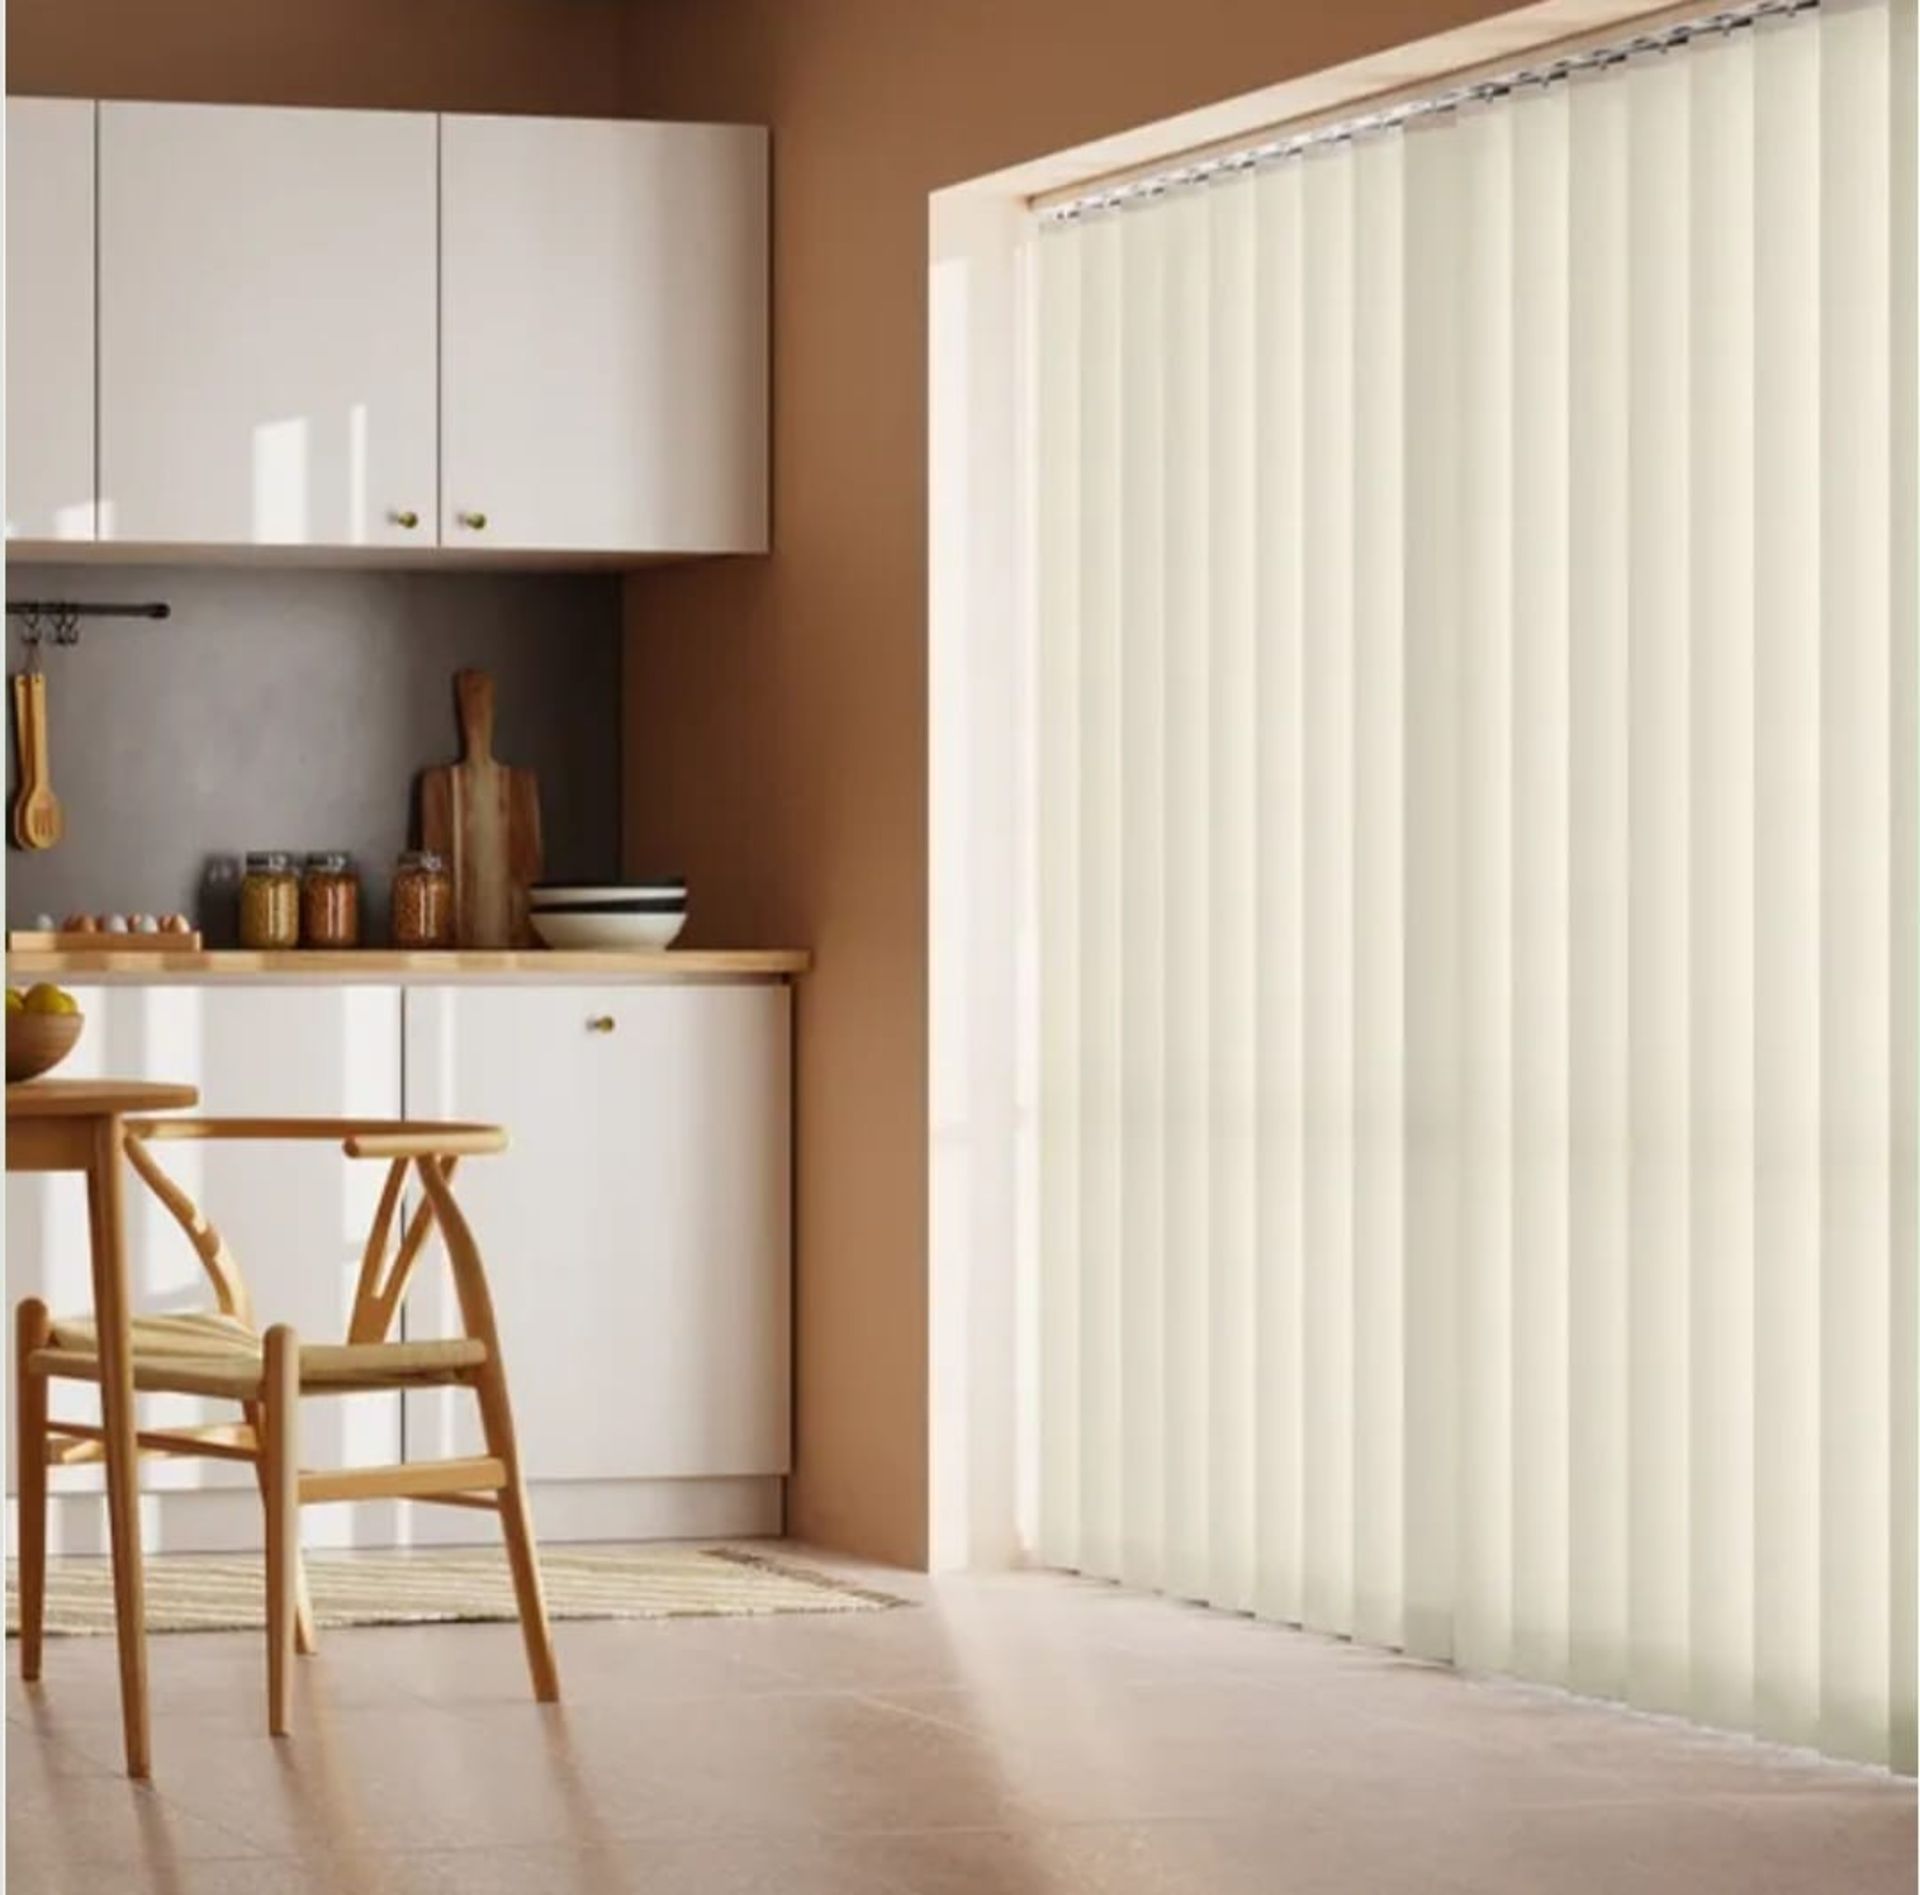 CREAM VERTICAL BLIND -COMPLETE WITH POLE & FITTINGS SIZES: 300 X 260 TOTAL RRP £165 - IMAGES ARE FOR